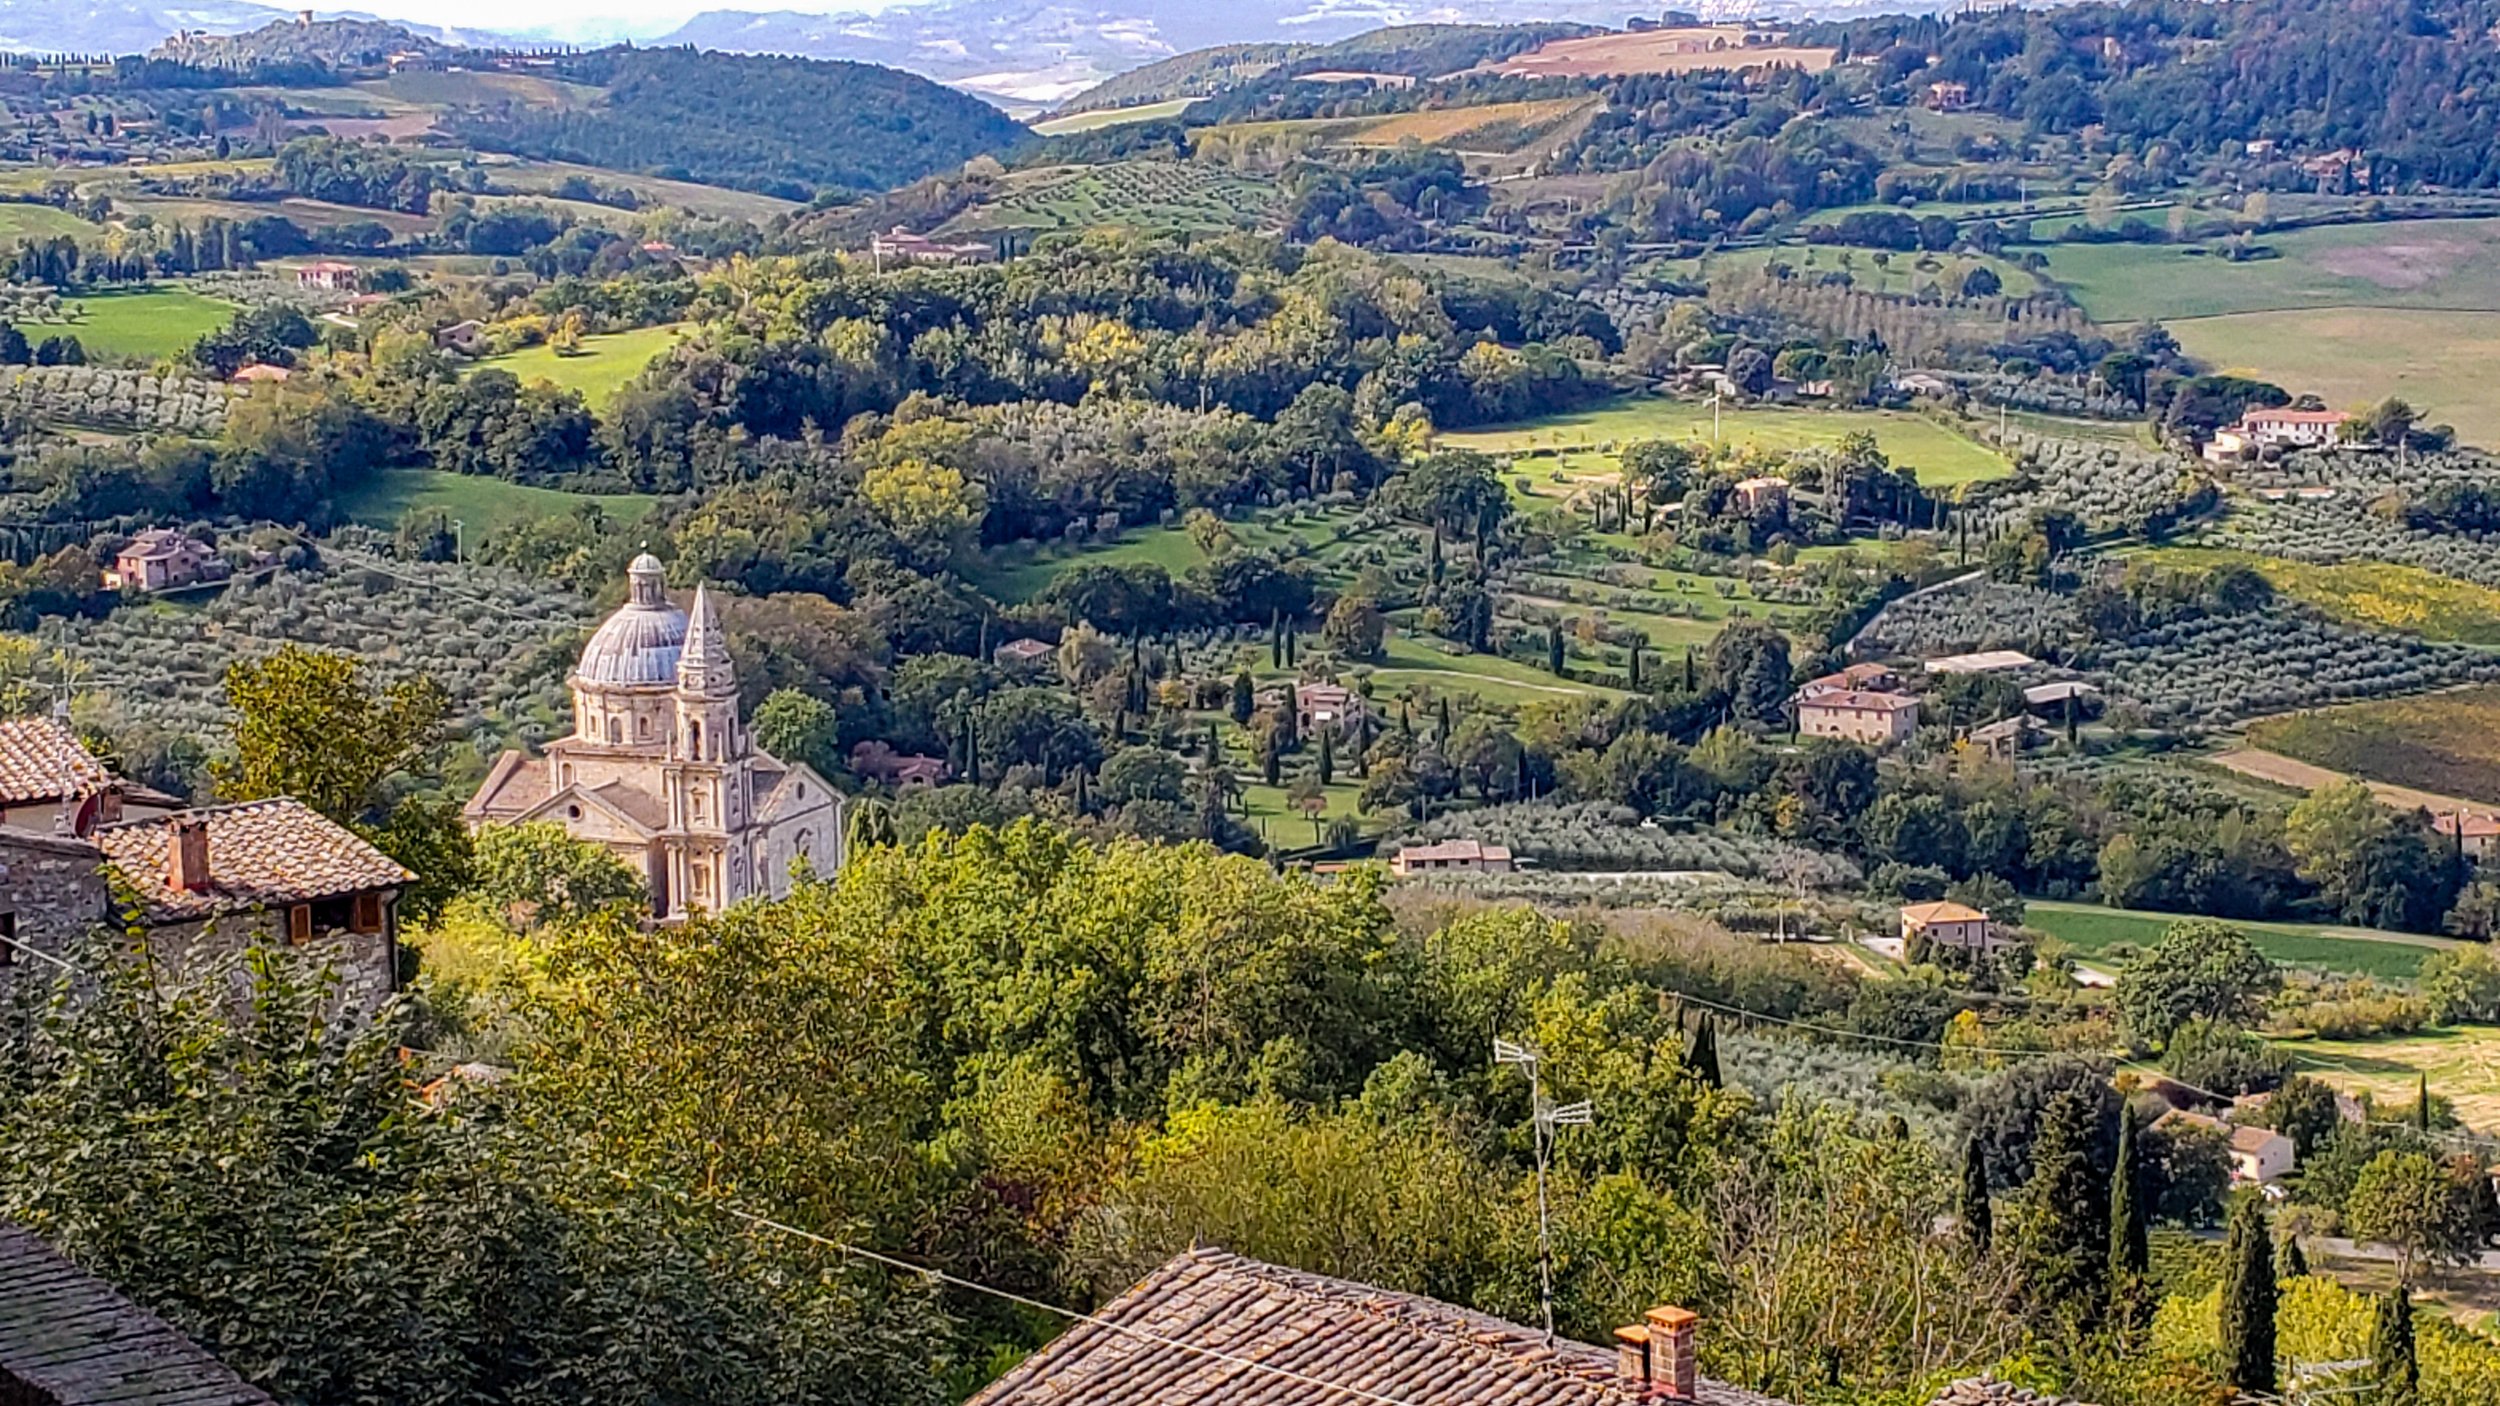 *The rich Montepulciano countryside